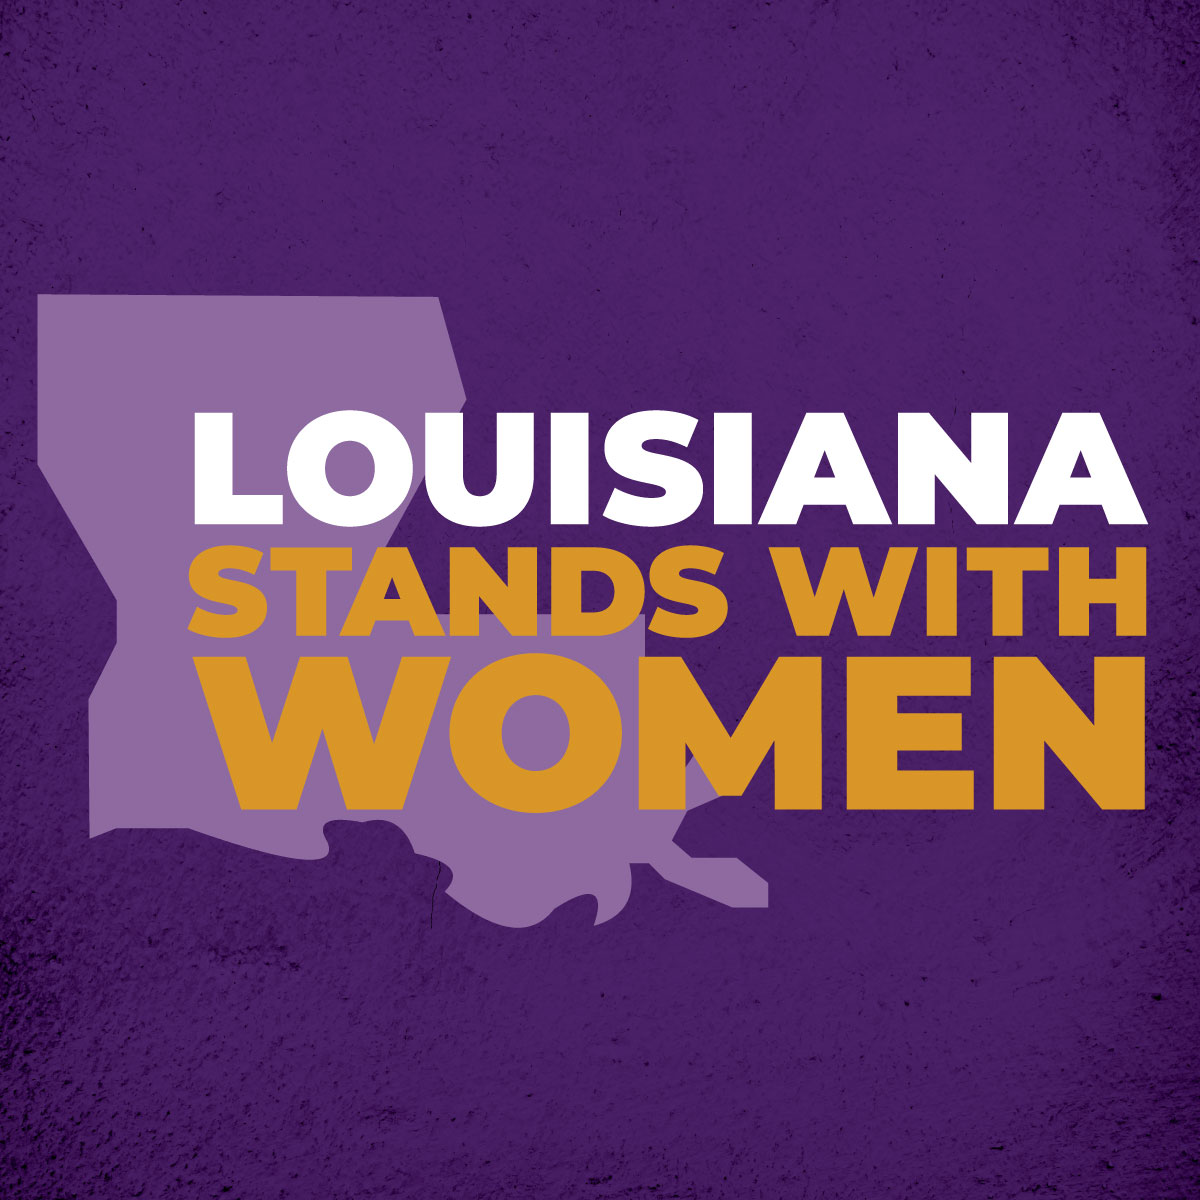 It's a great day for the 2.4M women in Louisiana! 🚺 Congratulations to Rep. Wilder, @RogerWilderIII, for advancing the Women's Safety and Protection Act, which defines 'male' & 'female' terms (already referenced 10,404 in LA statutes) & protects women's private spaces. The